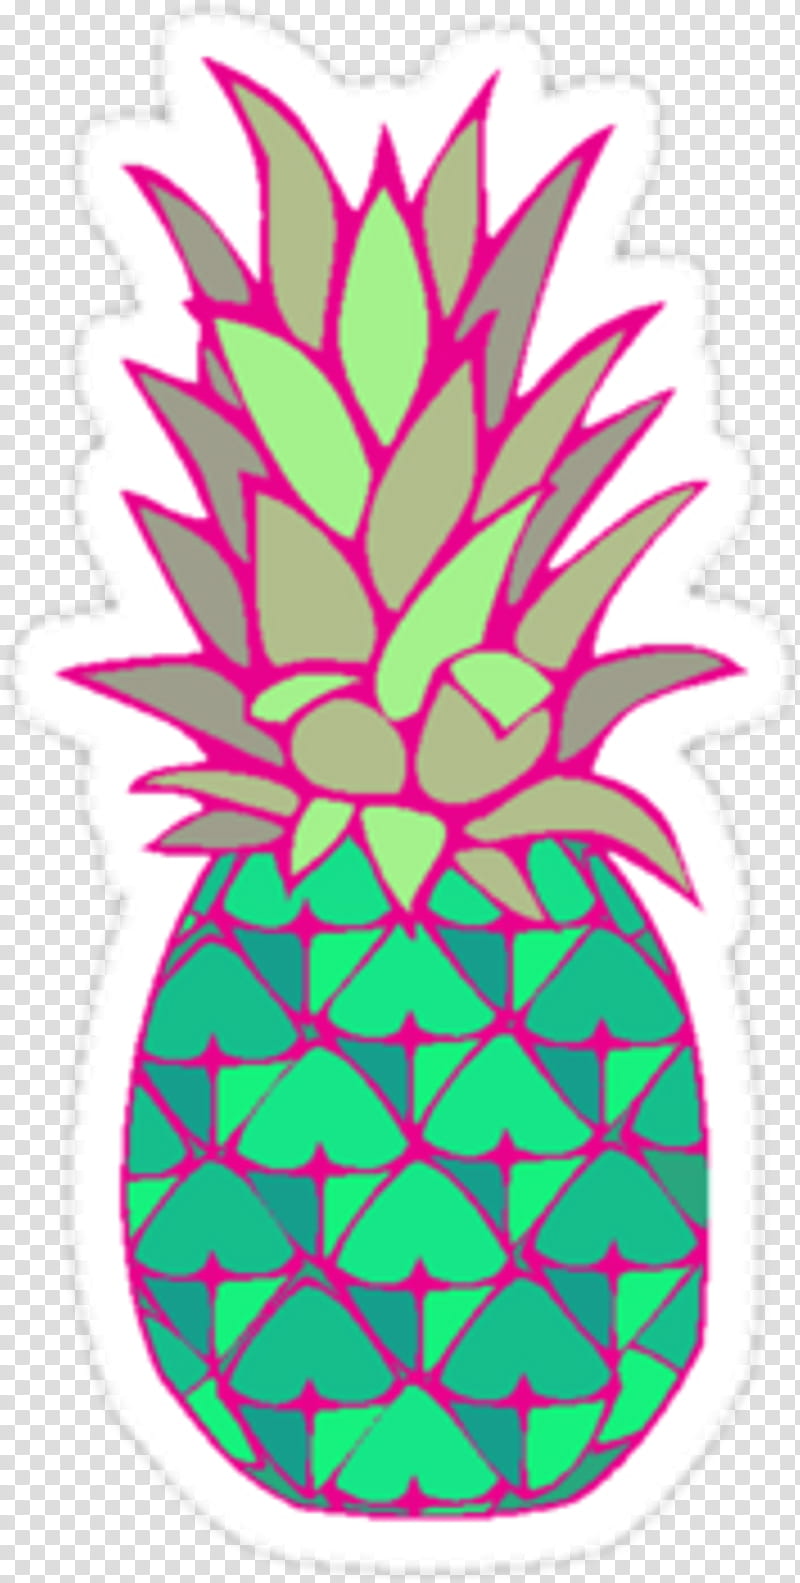 Fruit, Sticker, Pineapple, Decal, Red Pineapple, Bumper Sticker, Tshirt, Adhesive transparent background PNG clipart